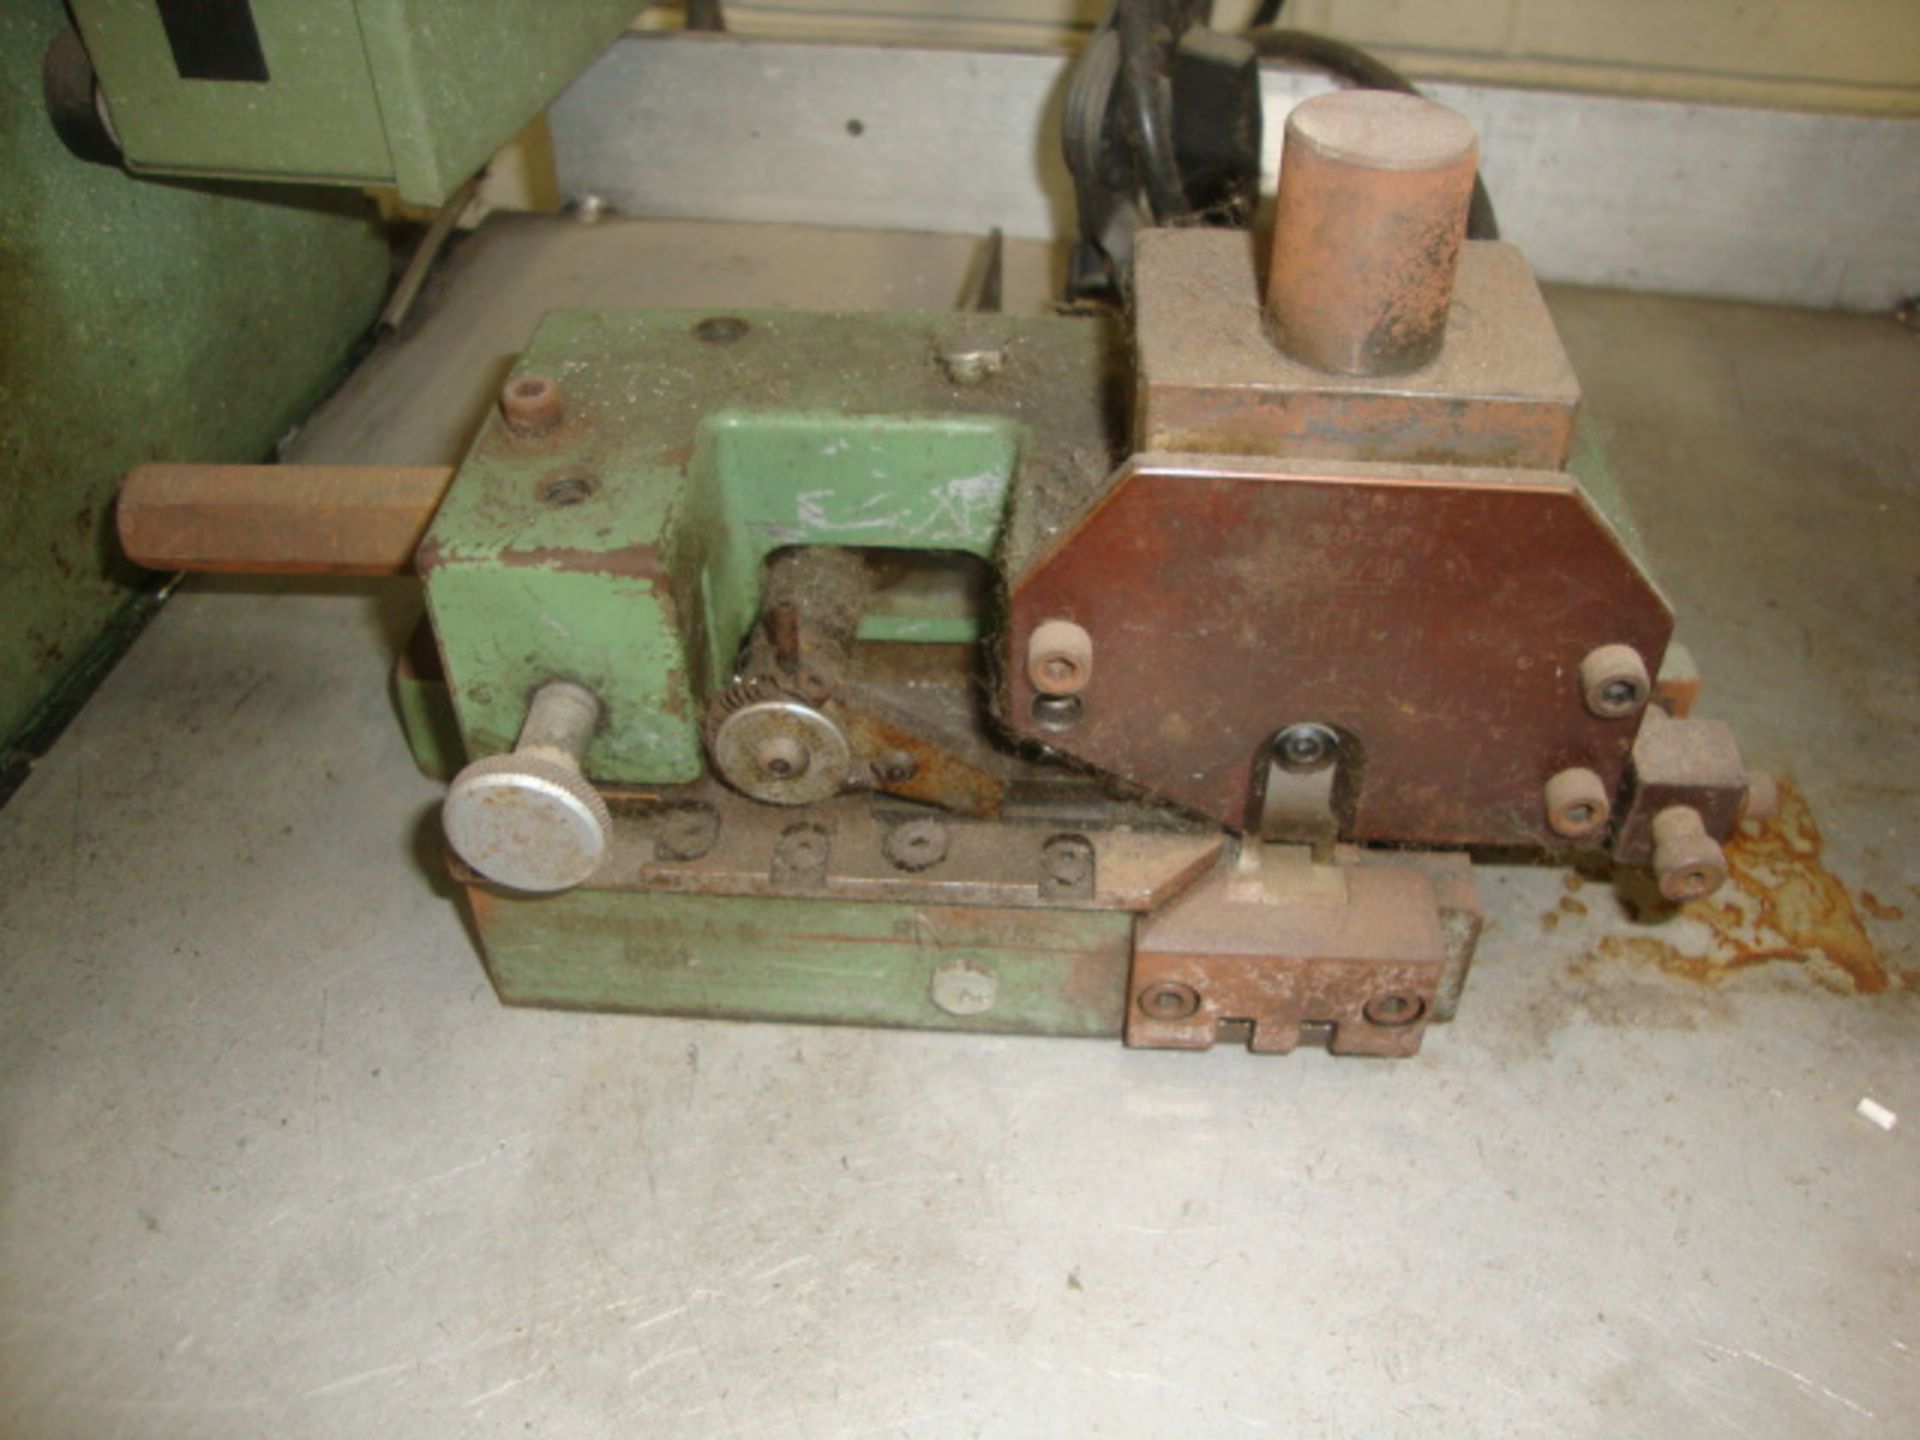 Kenco Packard Electric Speed-O-Matic Crimper on stand w/Foot Pedal and Light, model # 5K-7-150, 5 - Image 4 of 6